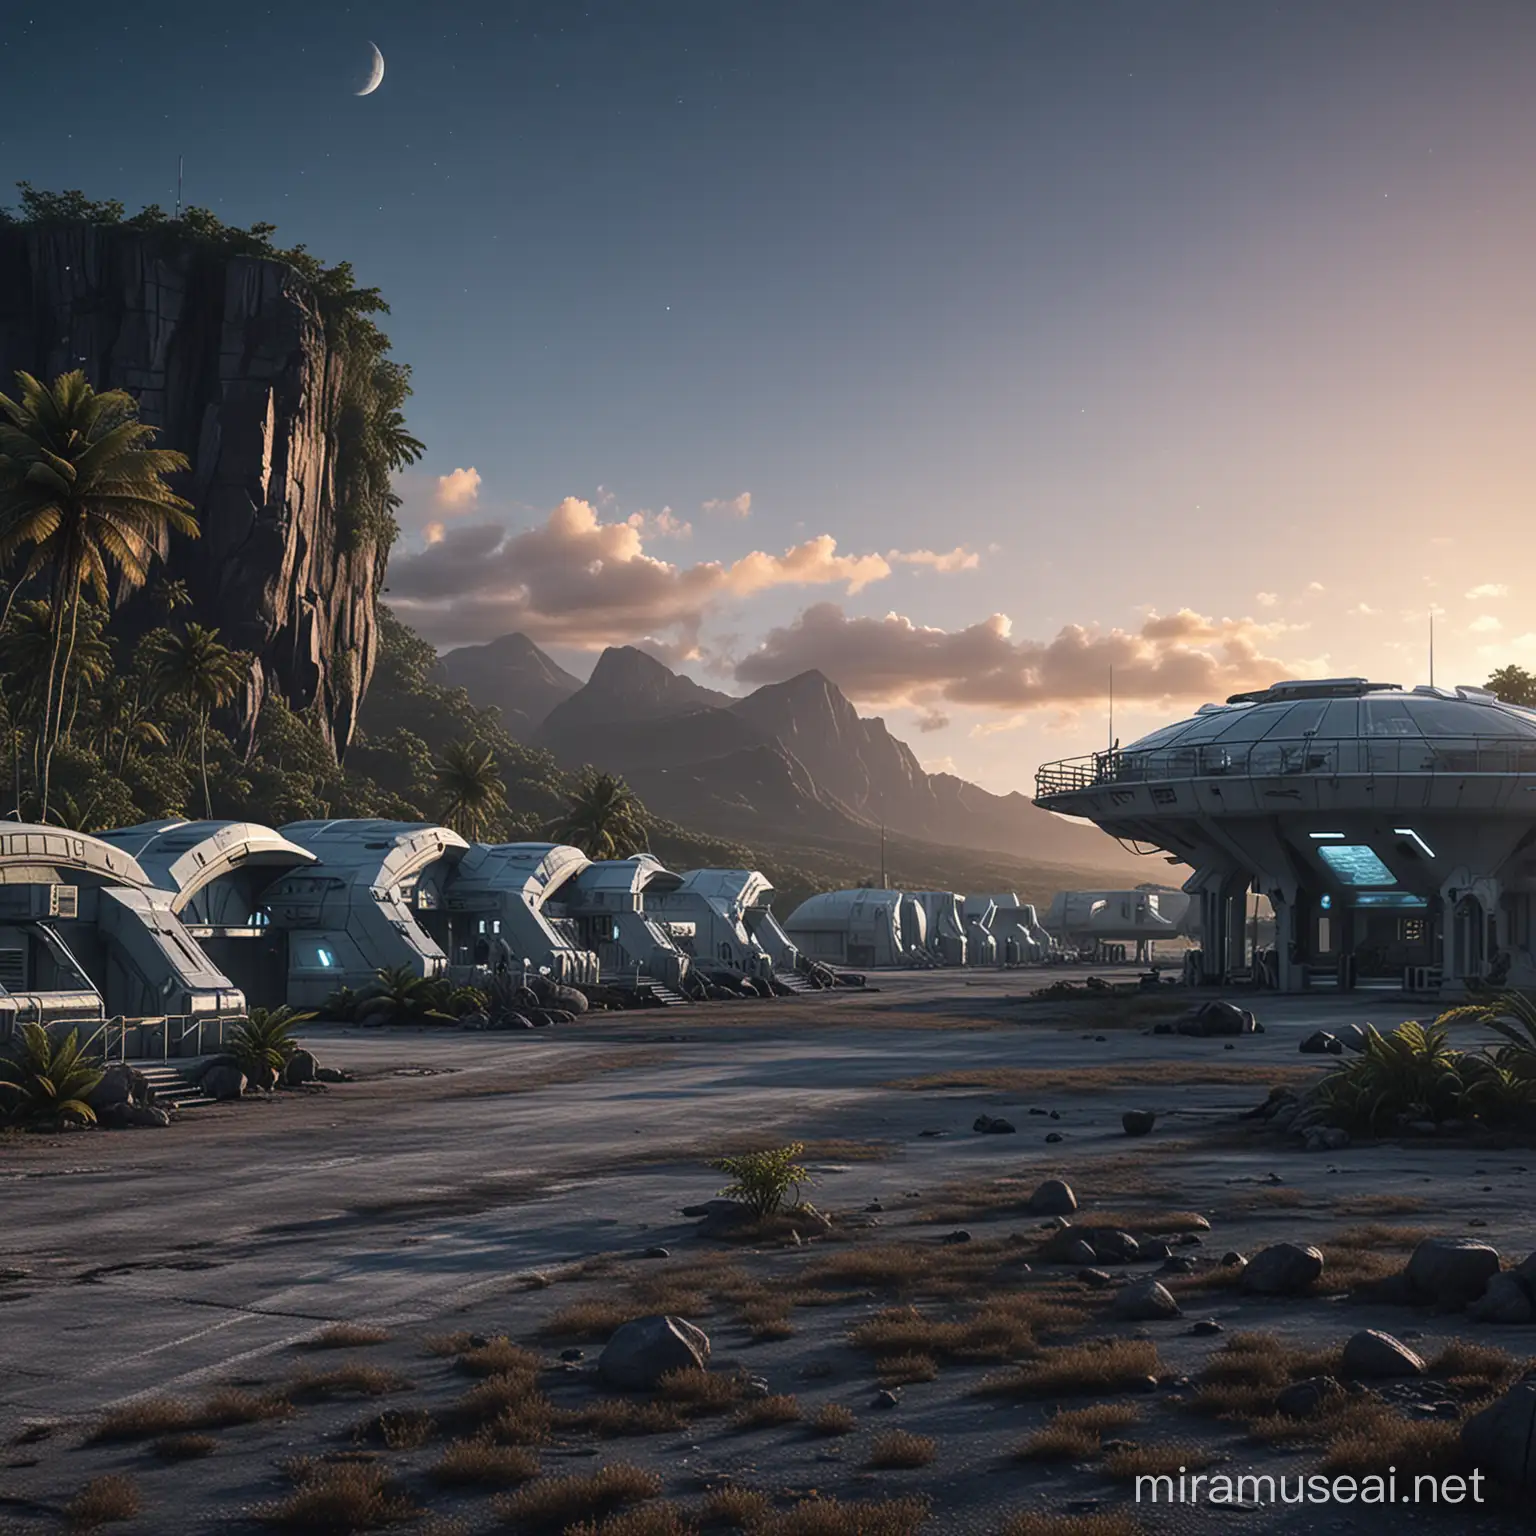 Futuristic Military Base in Remote Tropical Setting at Dusk